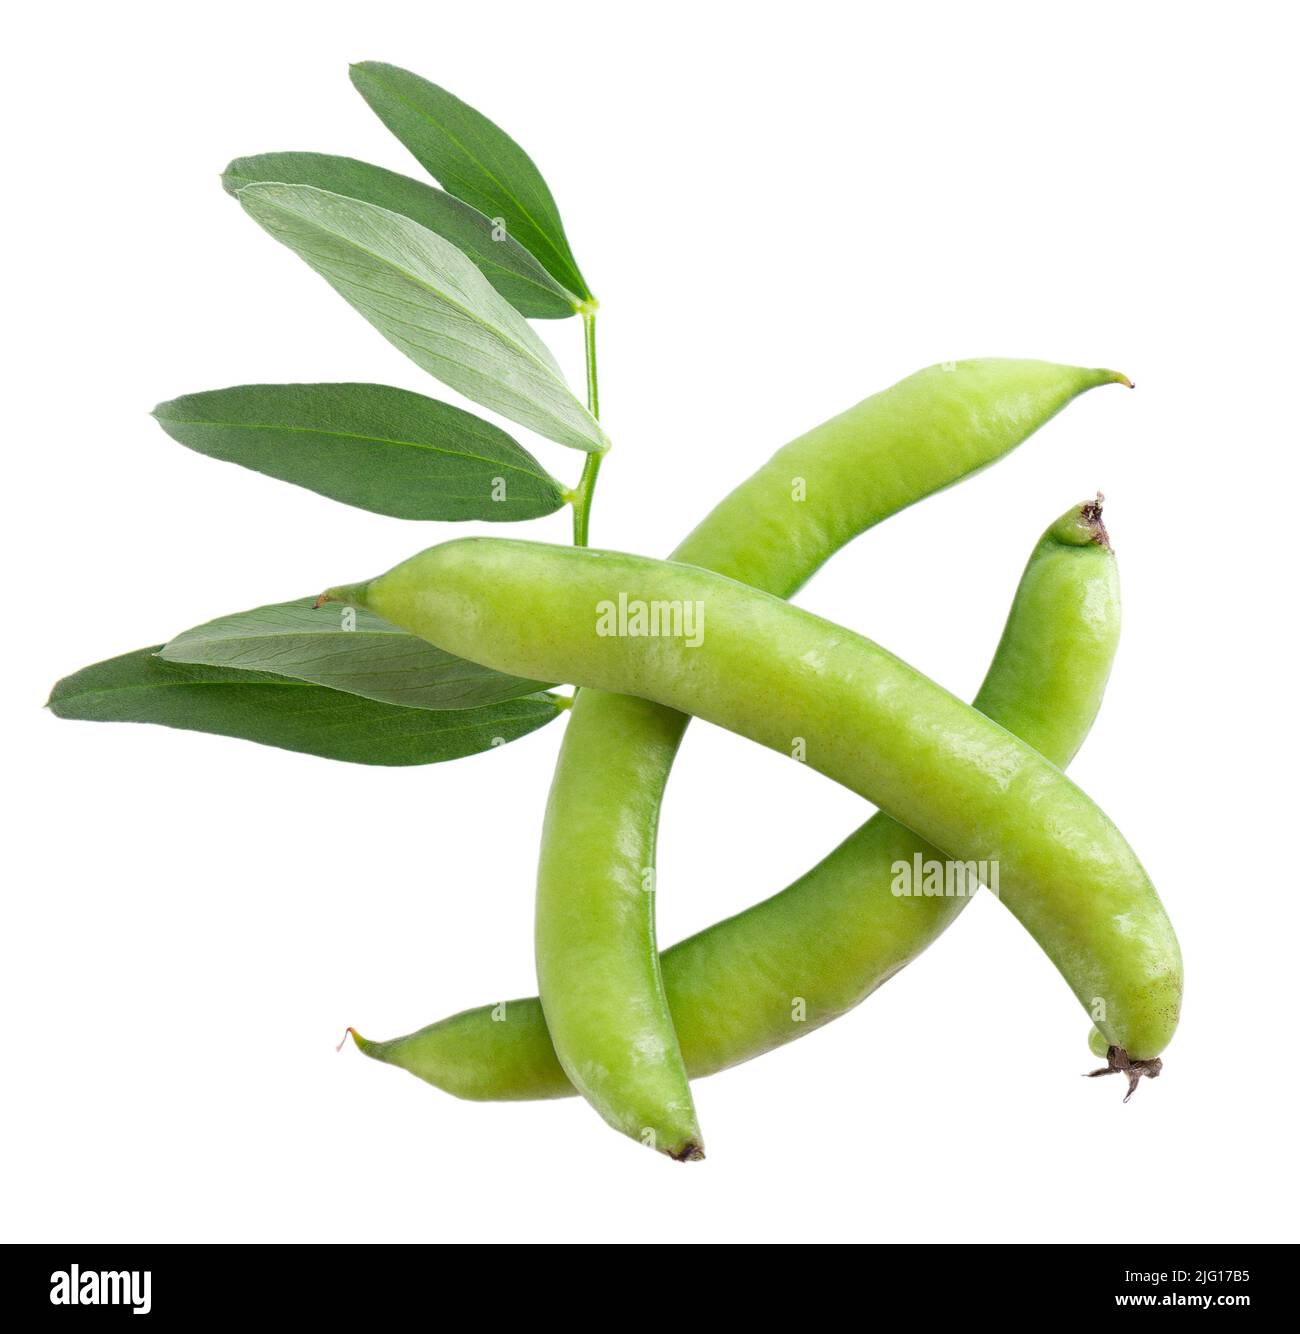 Fresh broad beans in pods with green leaf, isolated on white background. Fava beans. Top view Stock Photo